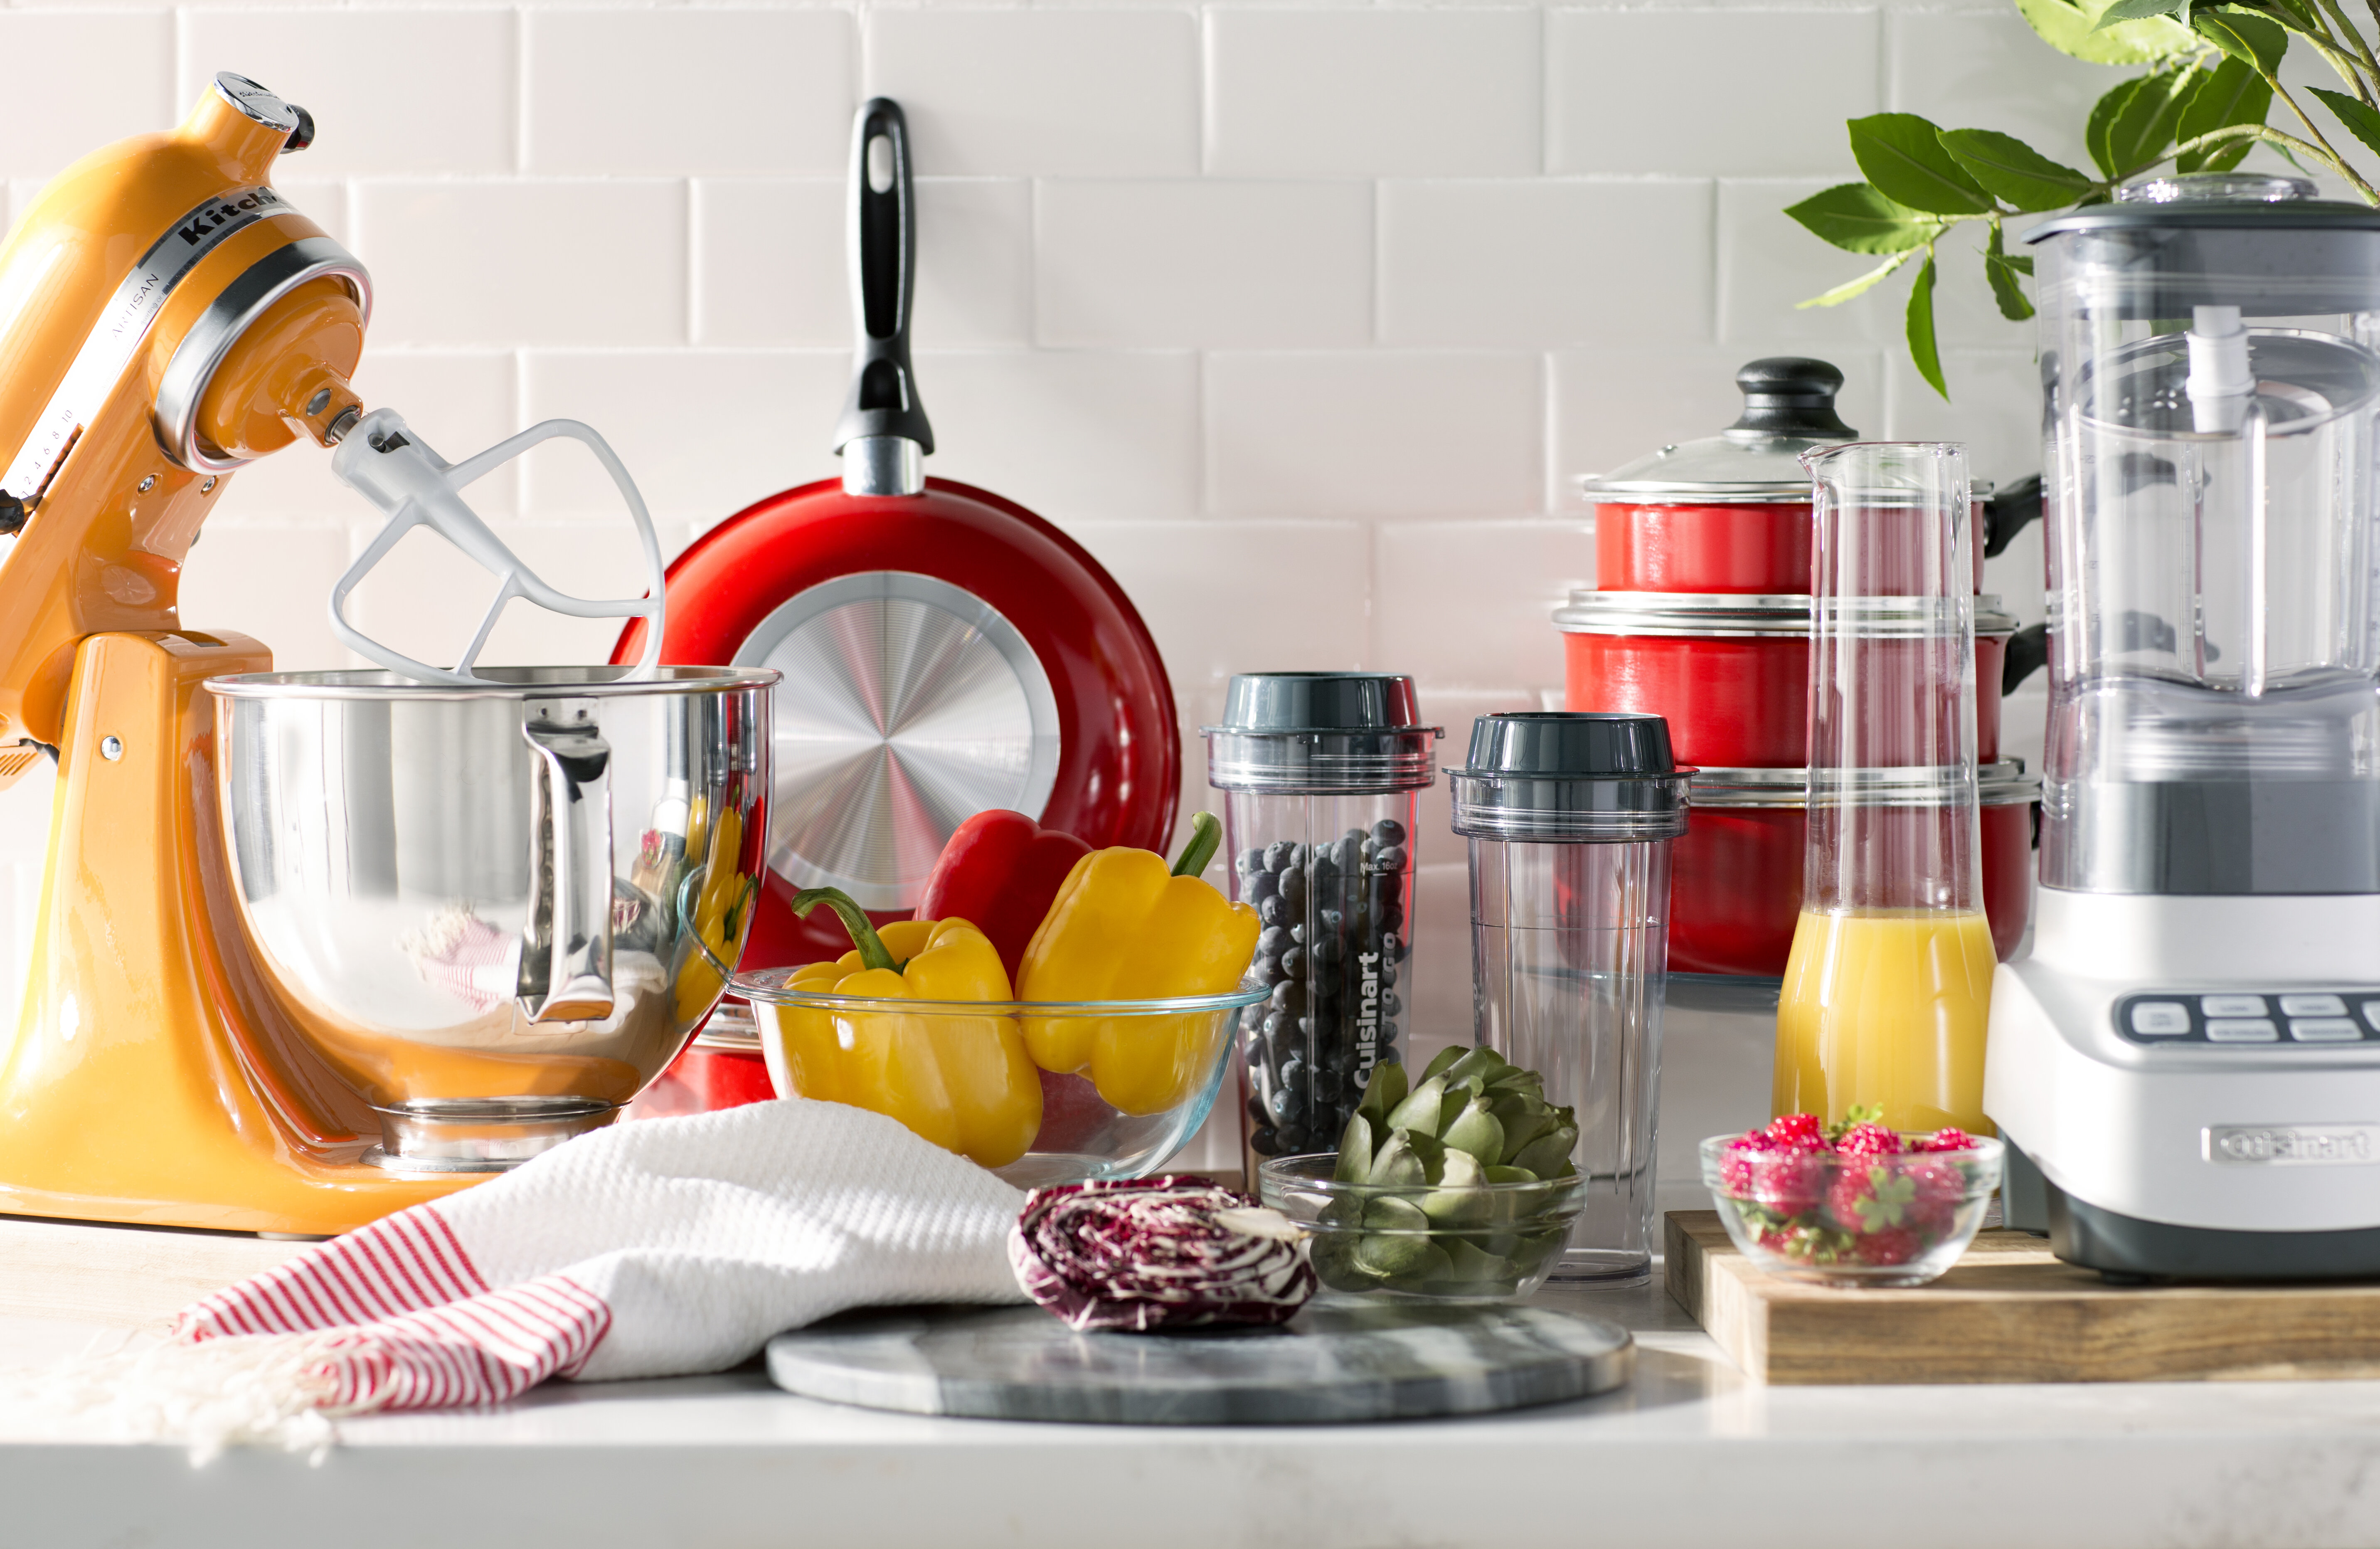 [BIG SALE] Small Kitchen Appliances You’ll Love In 2021 | Wayfair